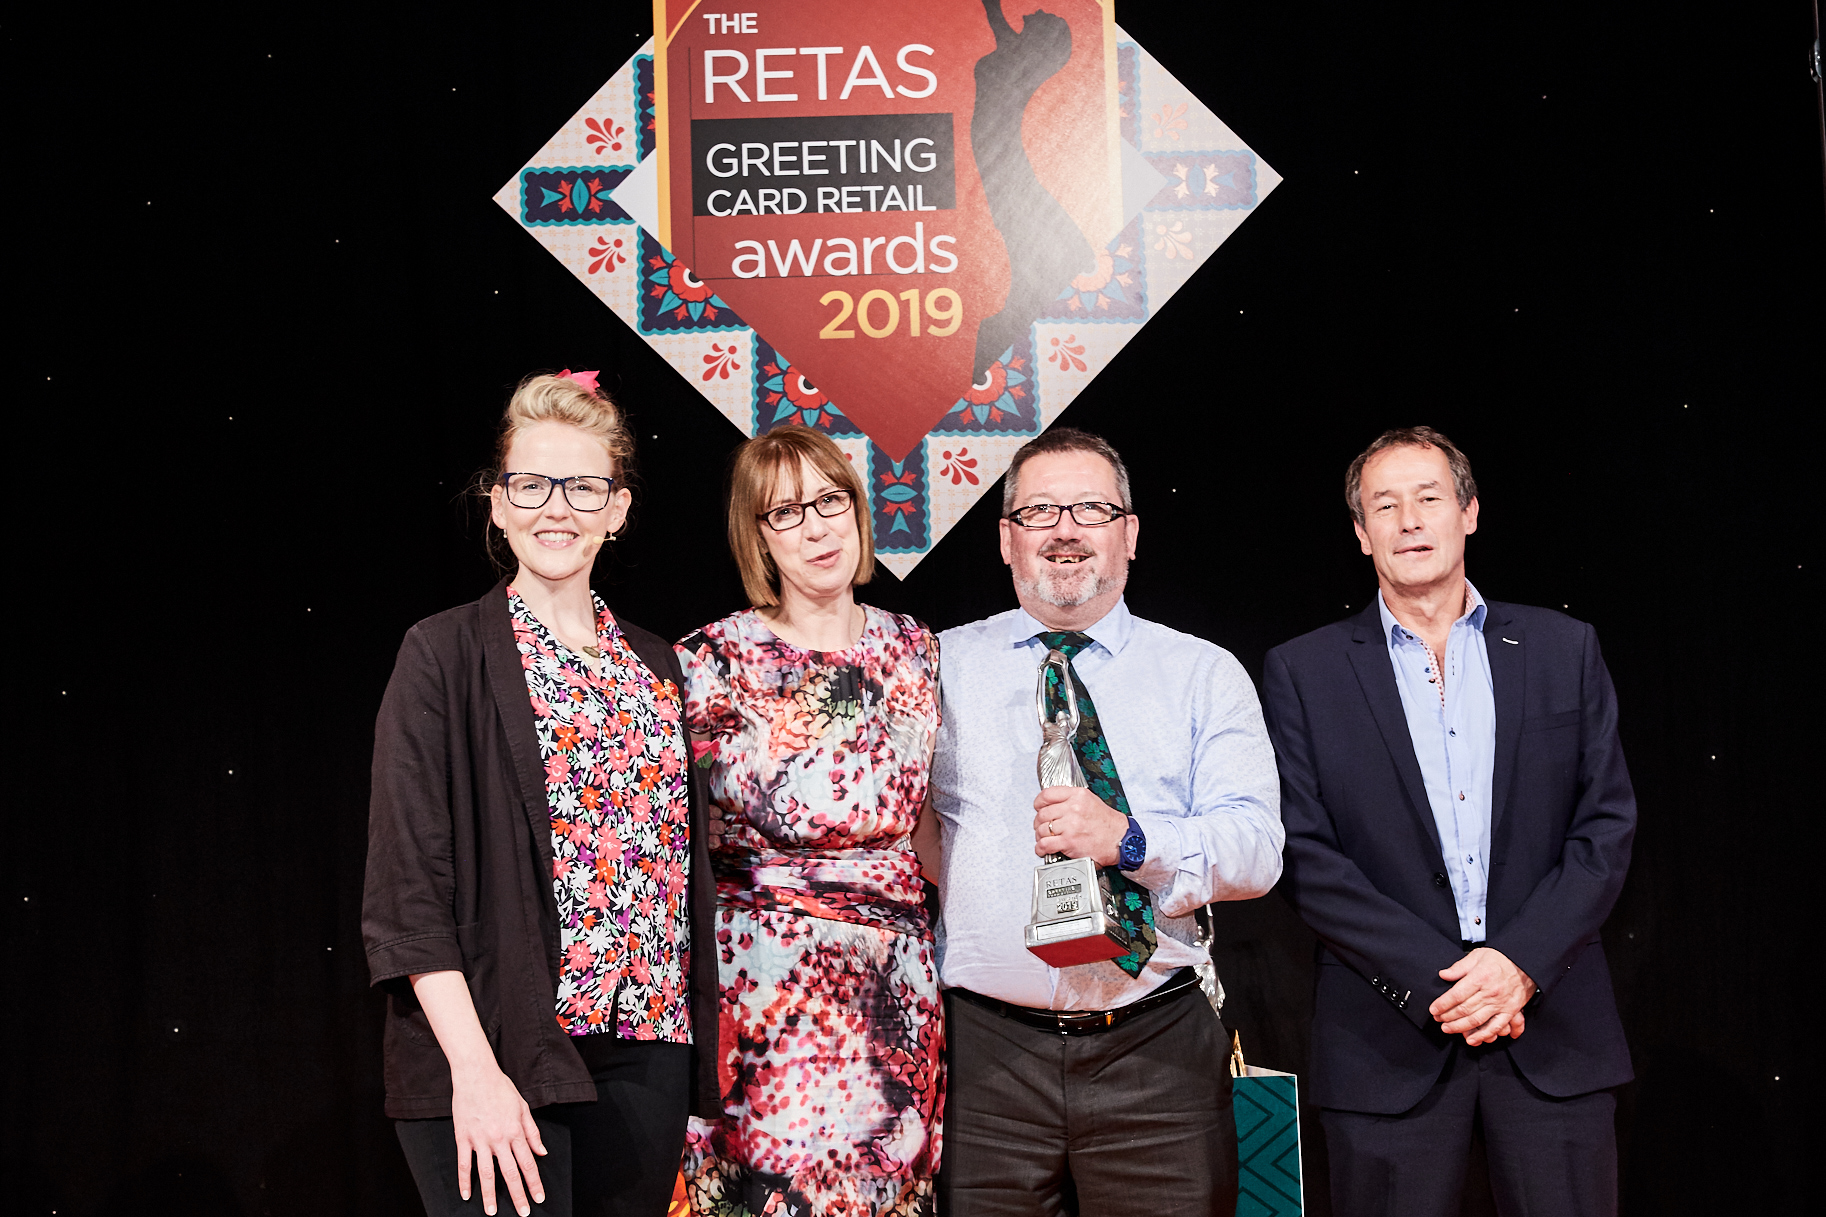 Above: (second and third left) Nigel and Karen Hamilton-Evans collecting their Retas award from Alister Marchant, ceo of Carte Blanche, sponsor of the award category and host Pippa Evans.